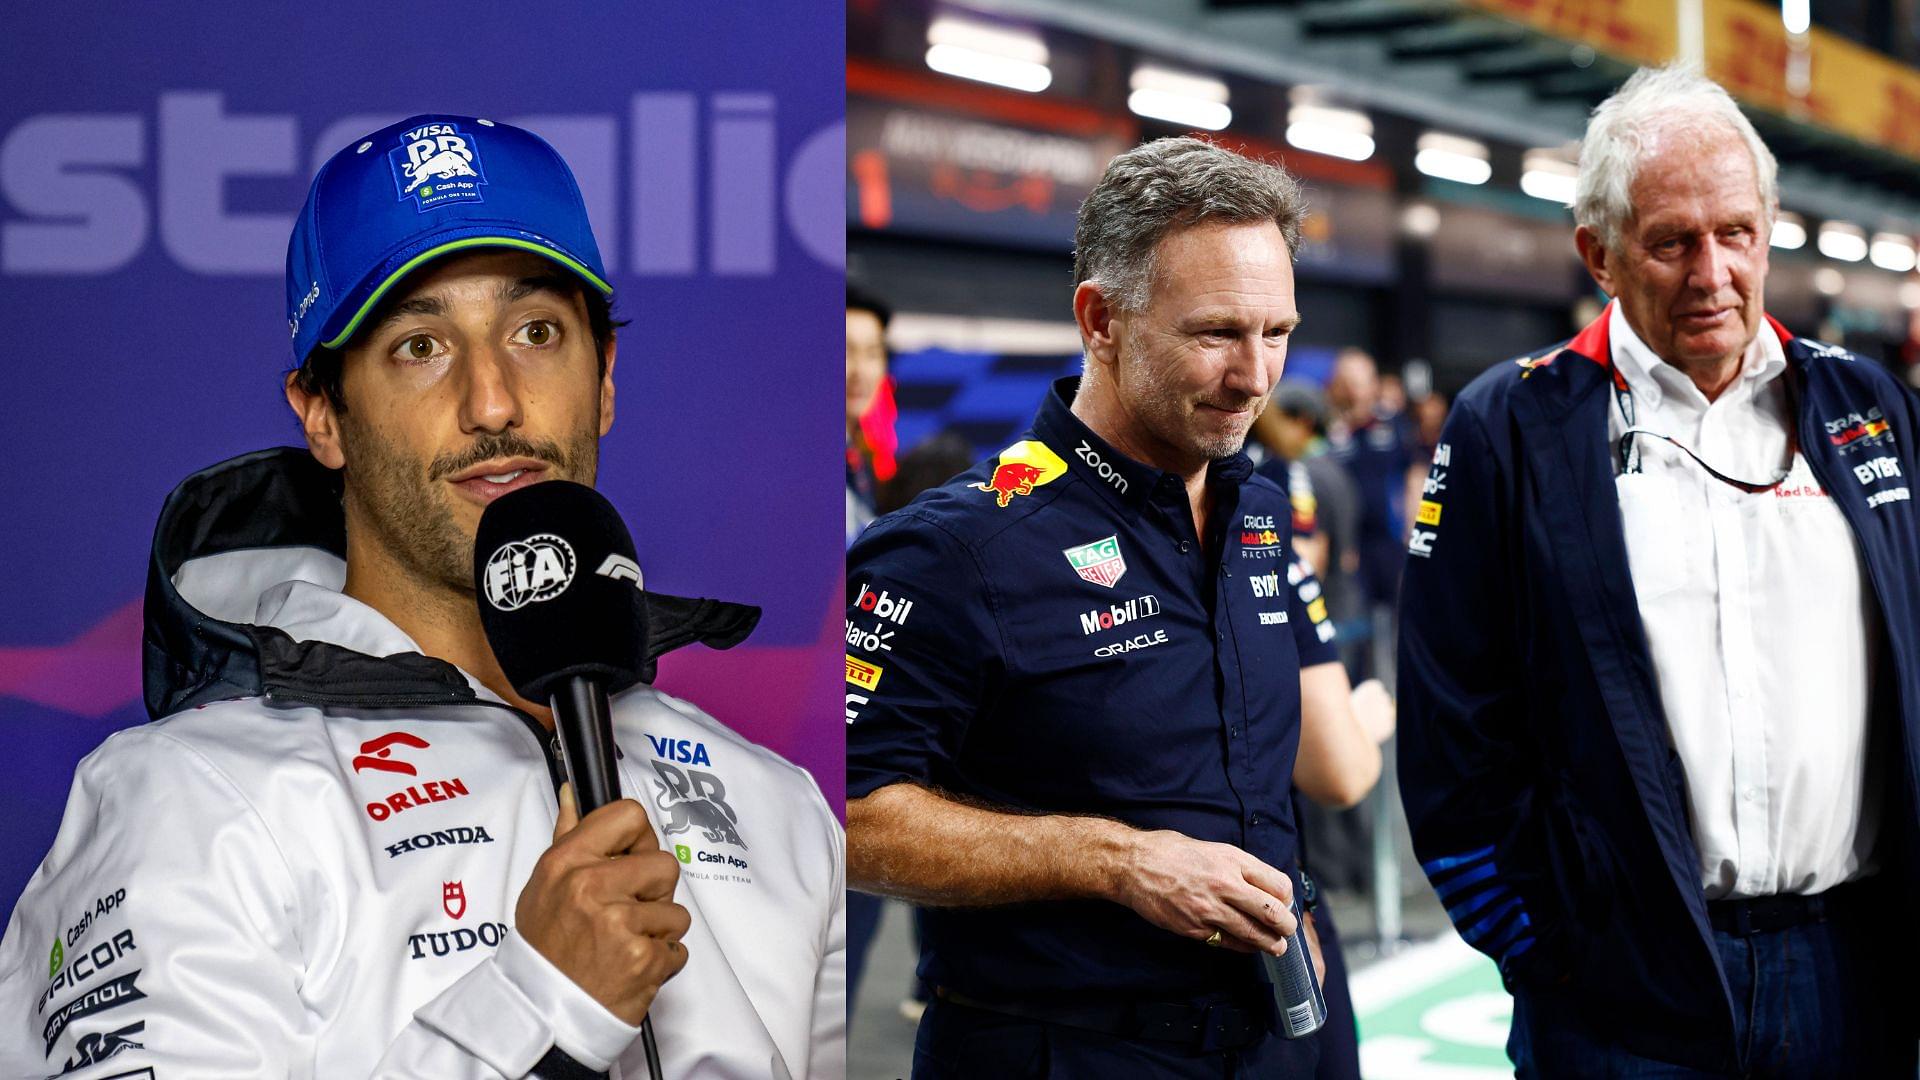 Daniel Ricciardo Becomes New Tipping Point in Rumored Feud Between Christian Horner and Helmut Marko